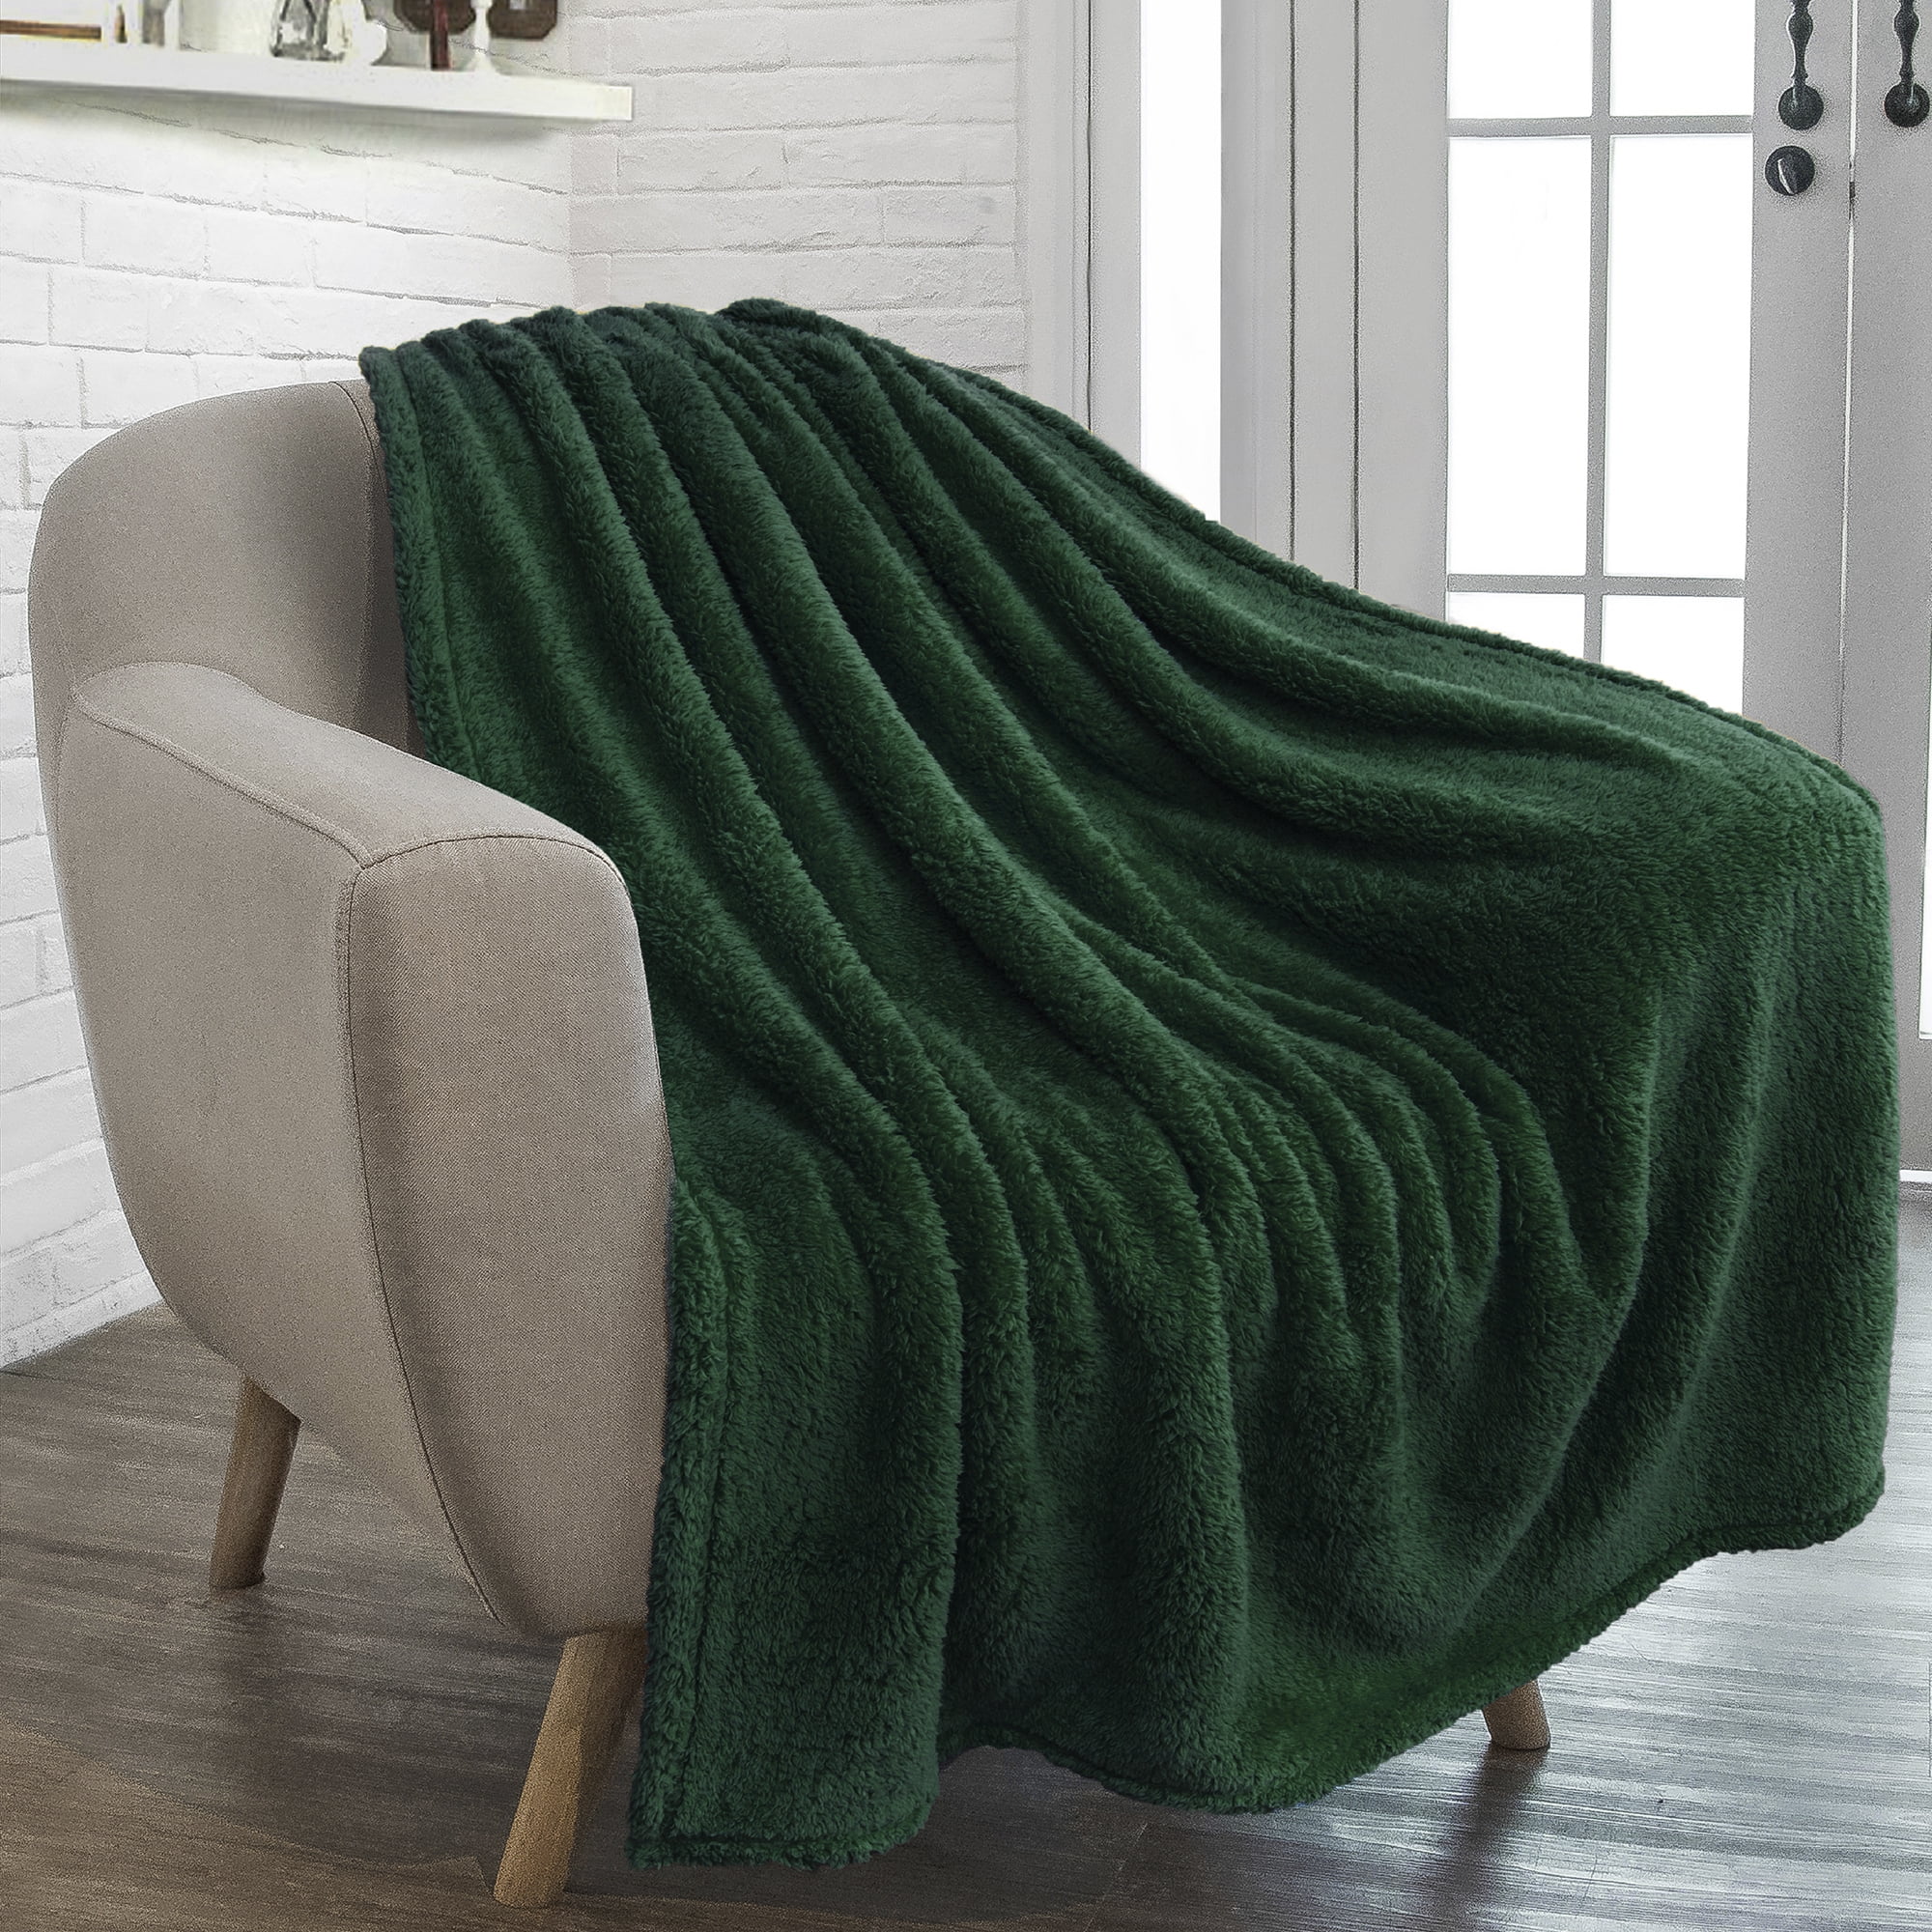 Super Soft Warm Green Fleece Blanket ideal for a bed or big enough for a sofa 